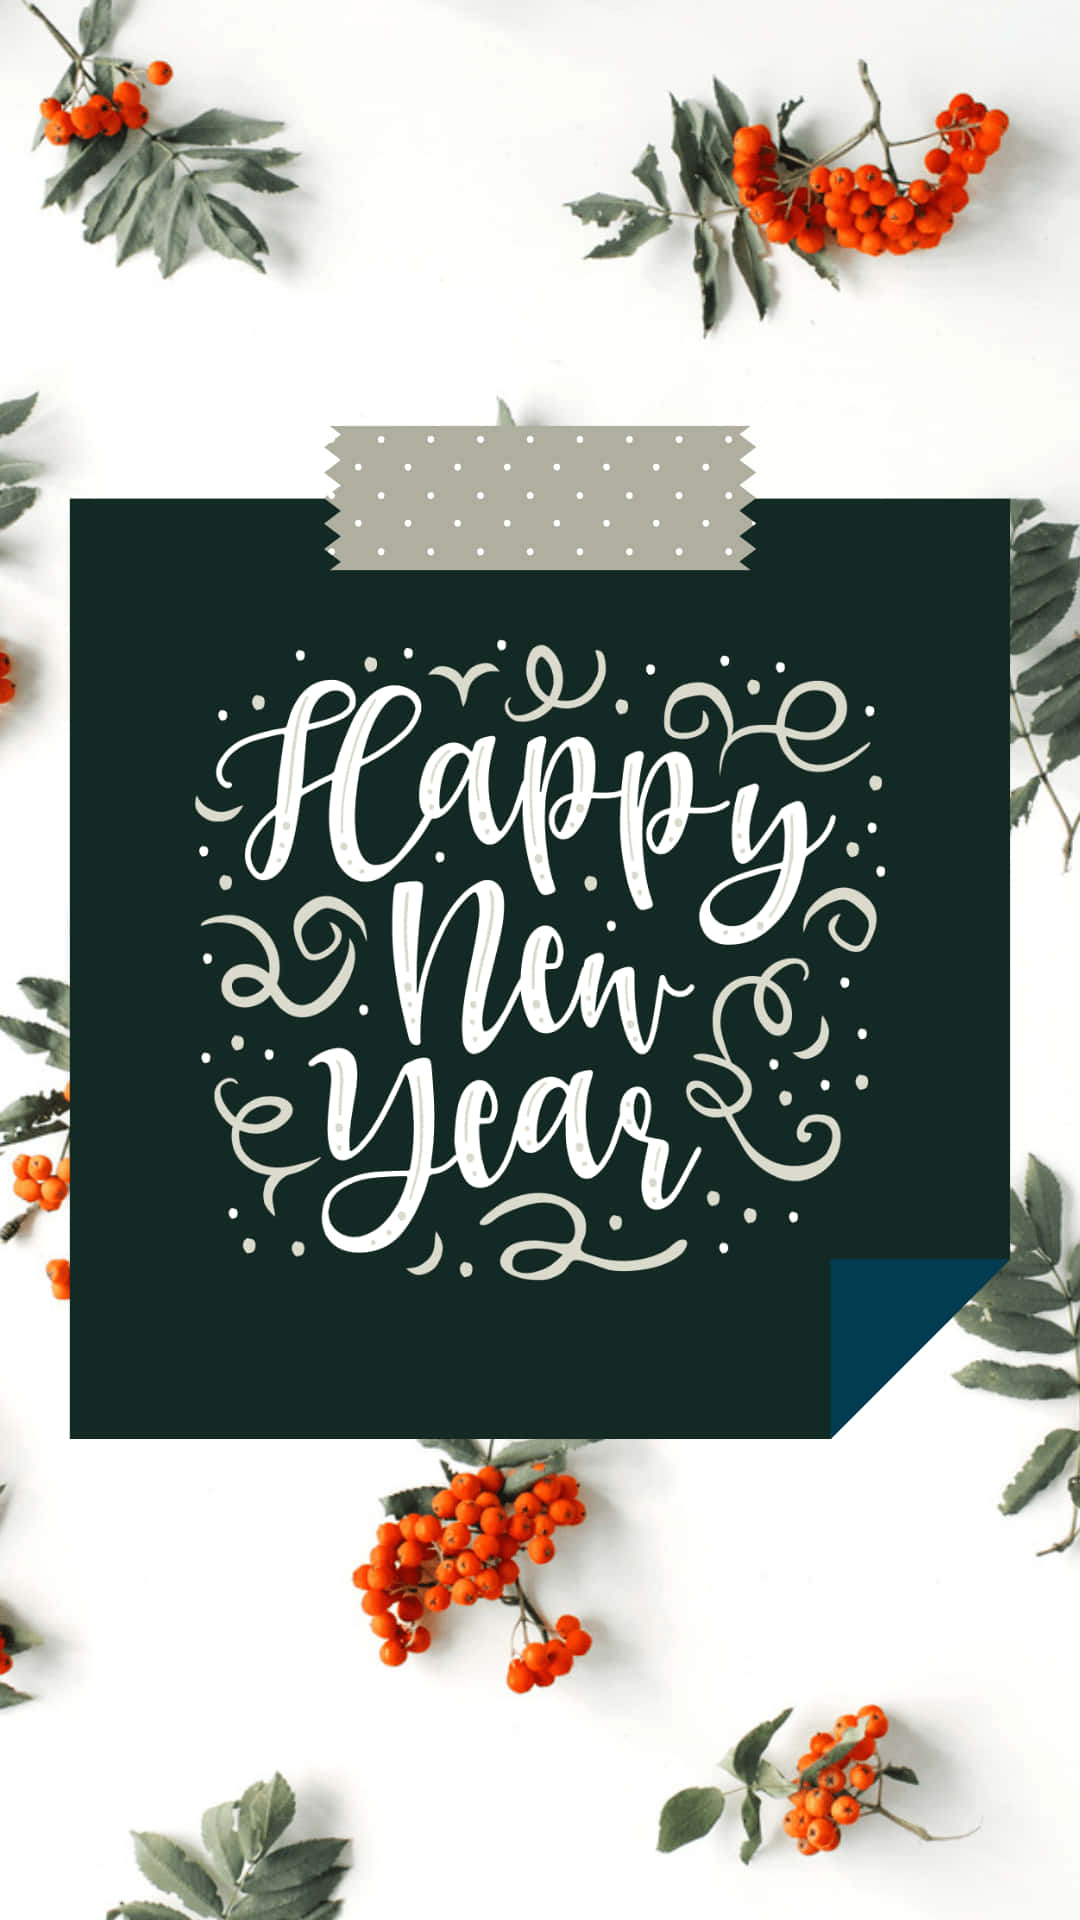 Happy New Year Greeting Card With Berries And Leaves Wallpaper